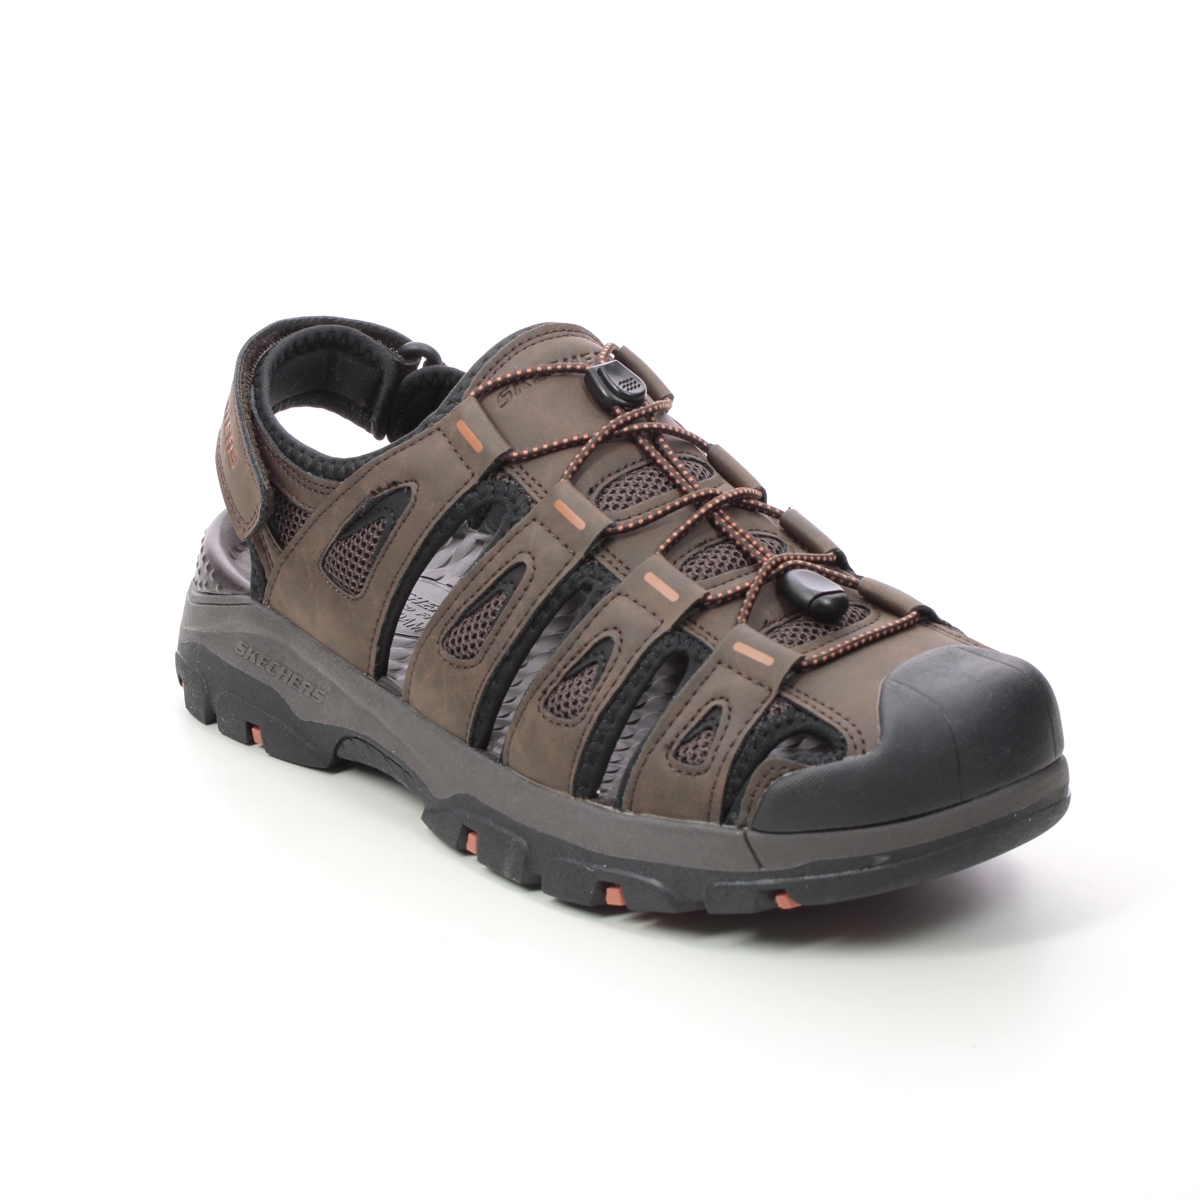 Skechers Tresmen Outseen CHOC Chocolate brown Mens Closed Toe Sandals 204111 in a Plain Man-made in Size 8